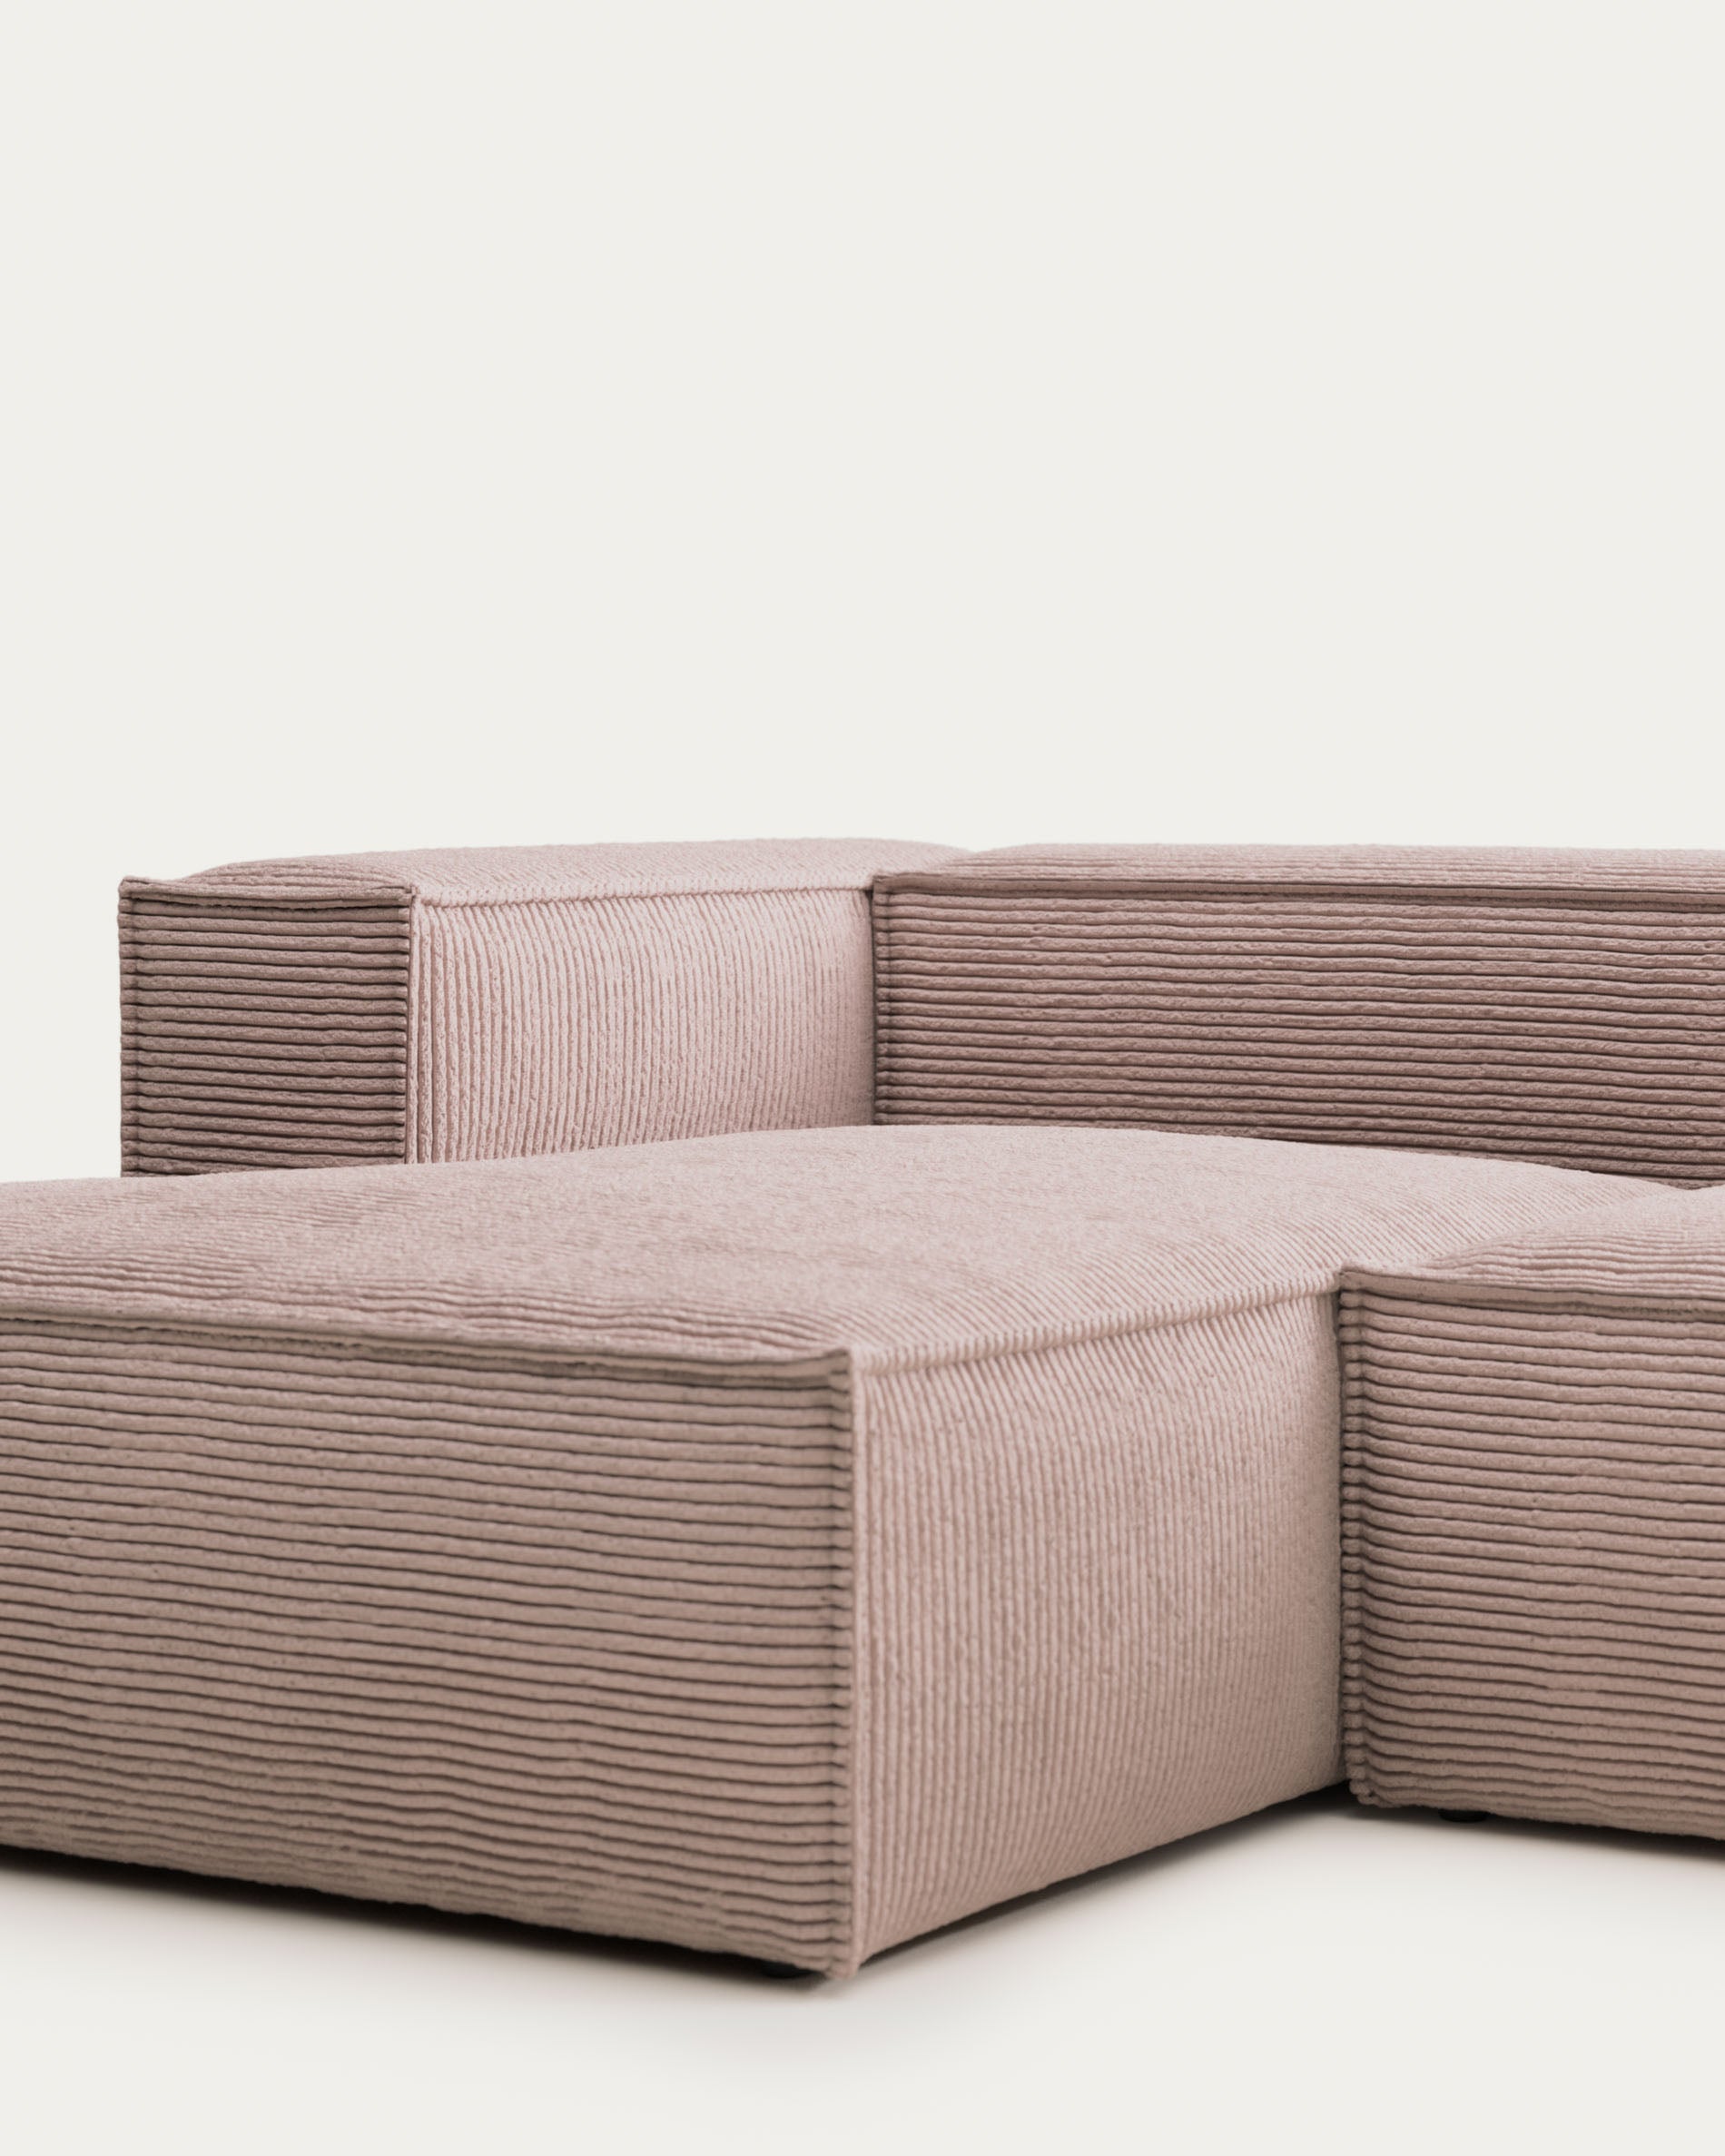 Blok 3-person sofa with chaise longue on the left in pink corduroy, 300 cm